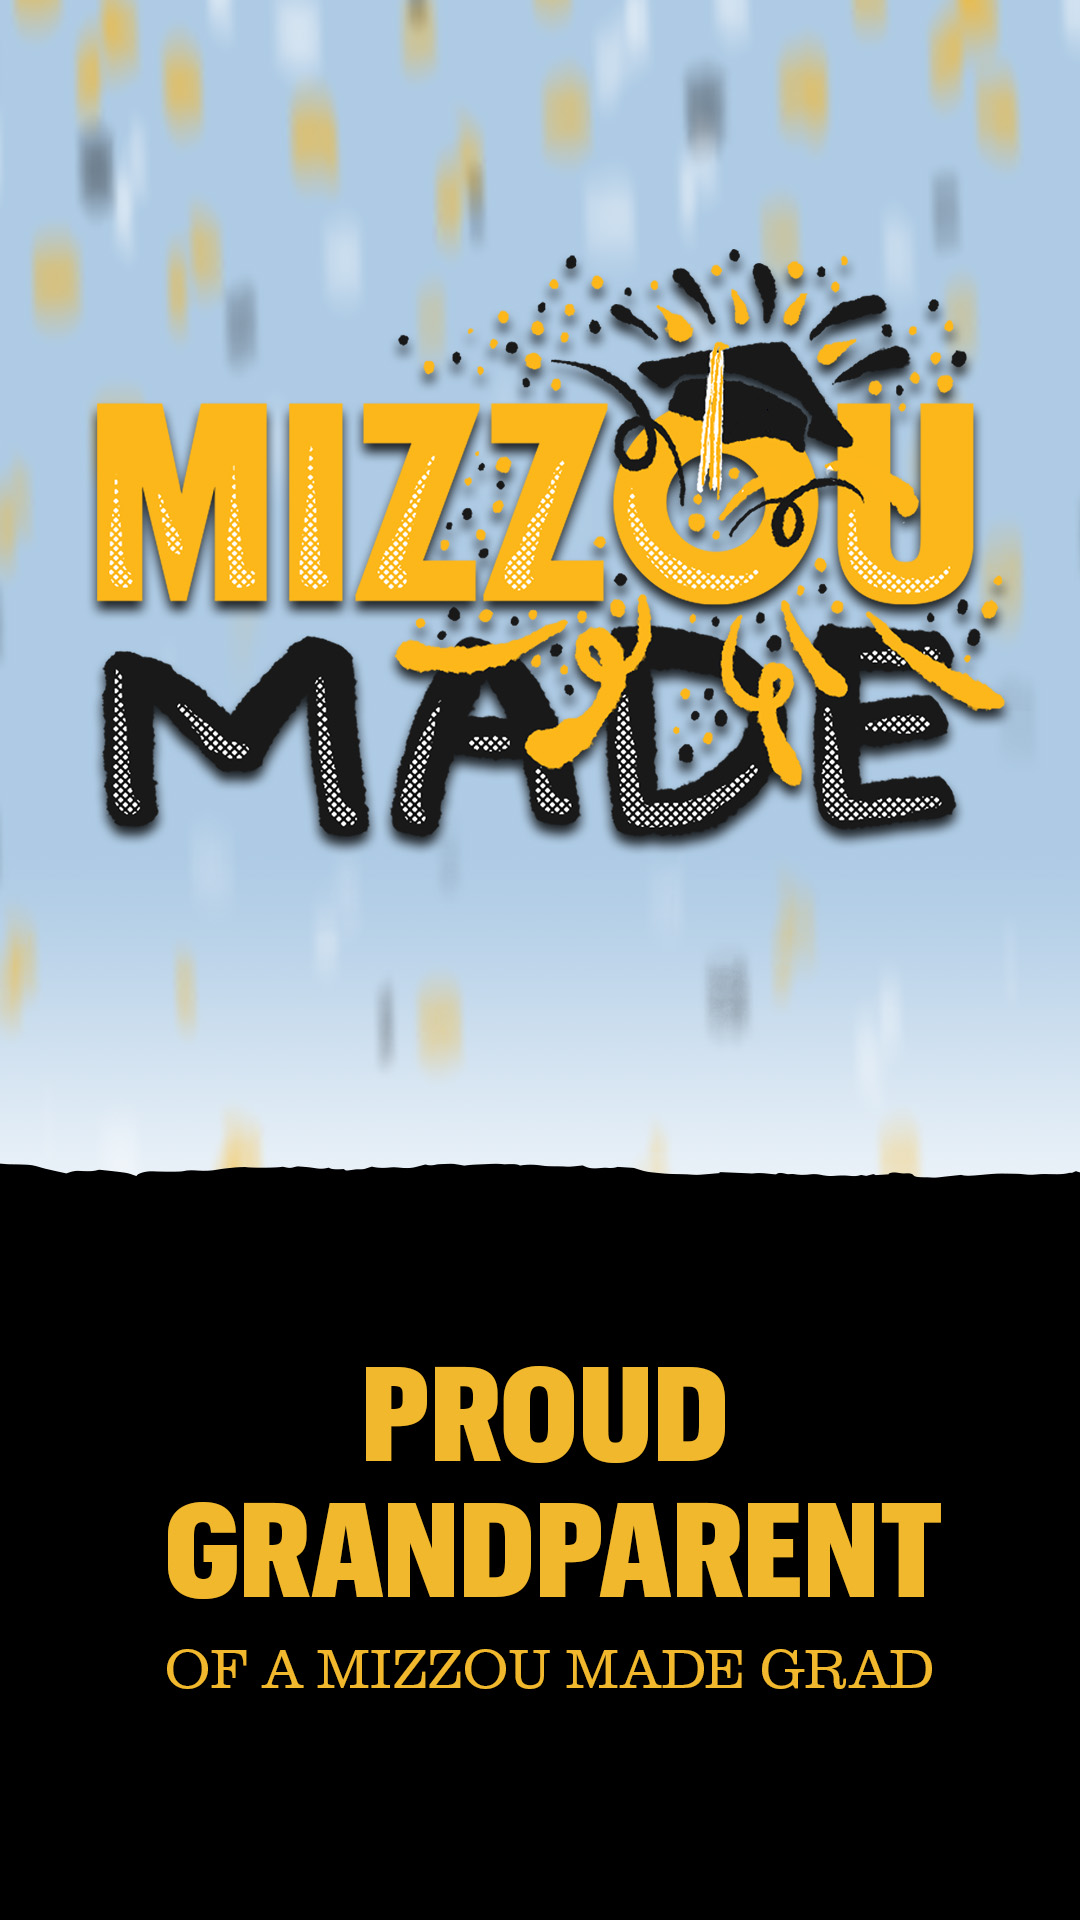 Light blue confetti background with a hand drawn gold bubble “Mizzou” and black “Made” stacked underneath it. The 'o' in the Mizzou has a graduation cap with confetti shooting out. The right side half looks like a ripped black page with gold text that says 